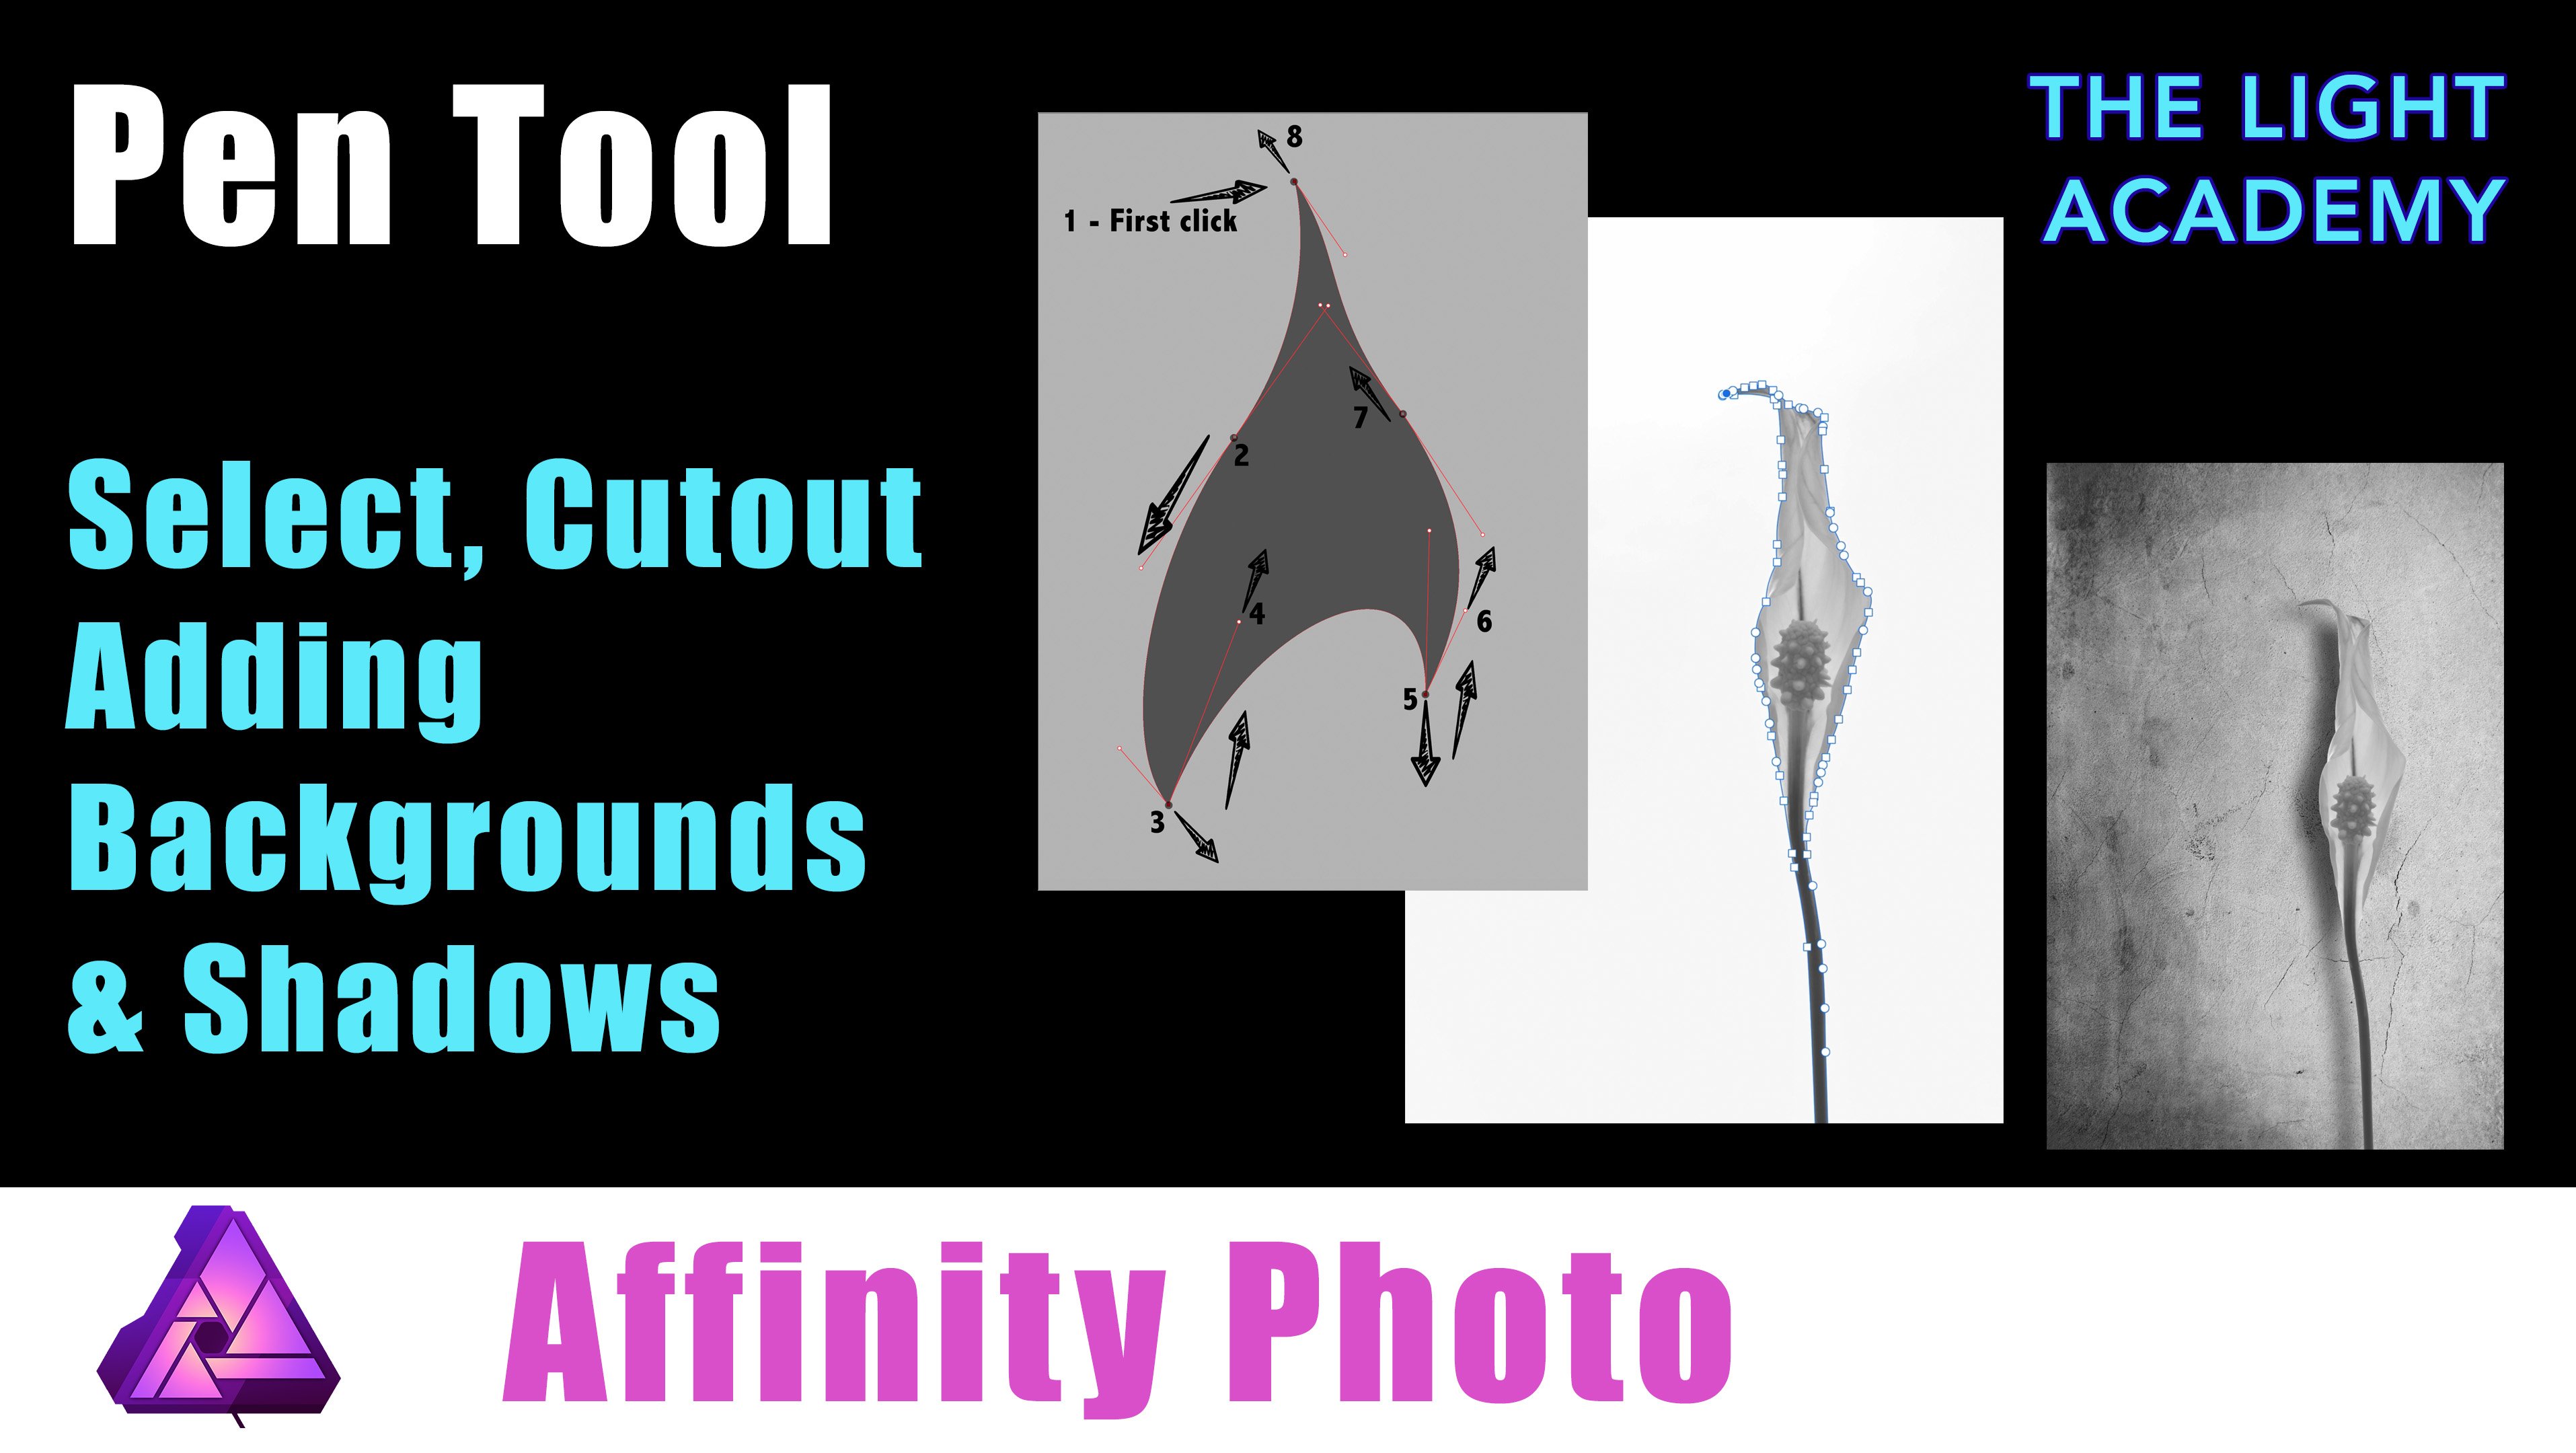 Affinity Photo – Pen Tool, Cutout, Selection, Adding a Background & Shadow